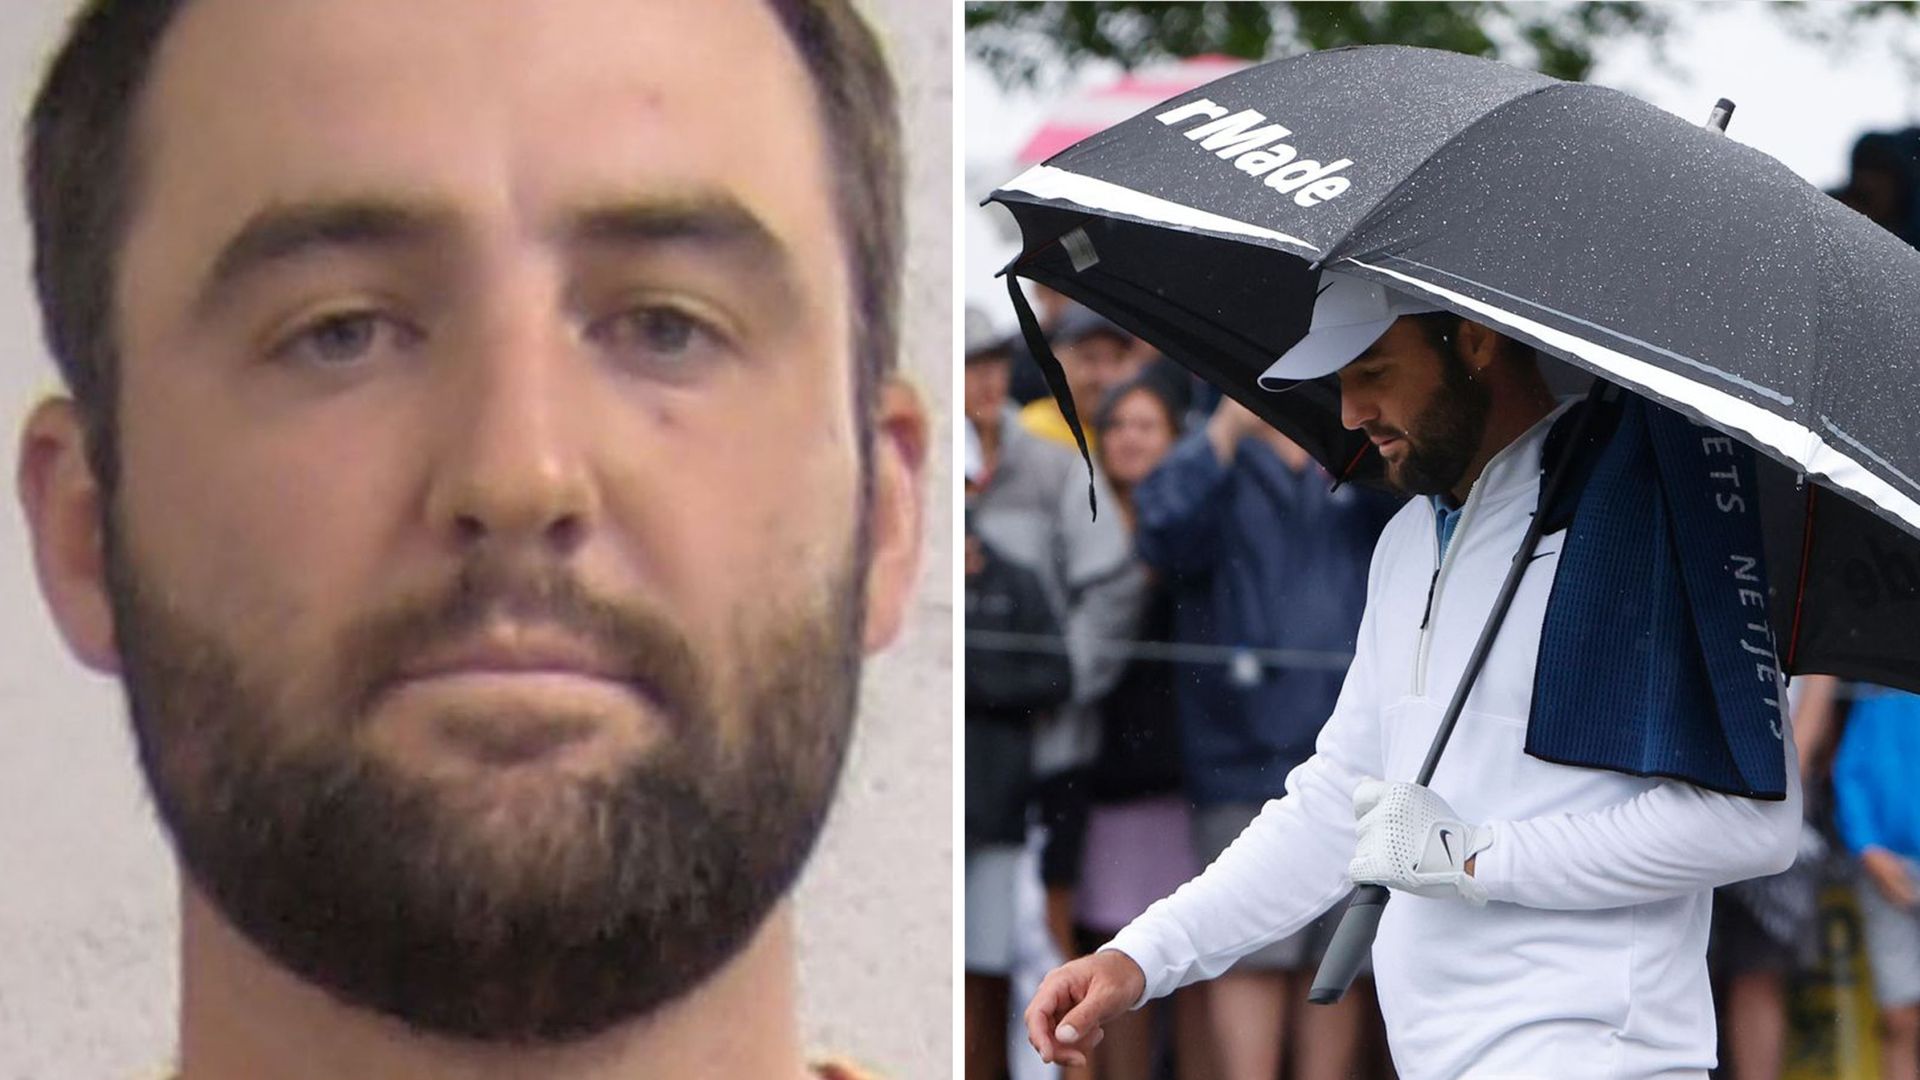 World number one golfer plays major tournament hours after being handcuffed and charged by police